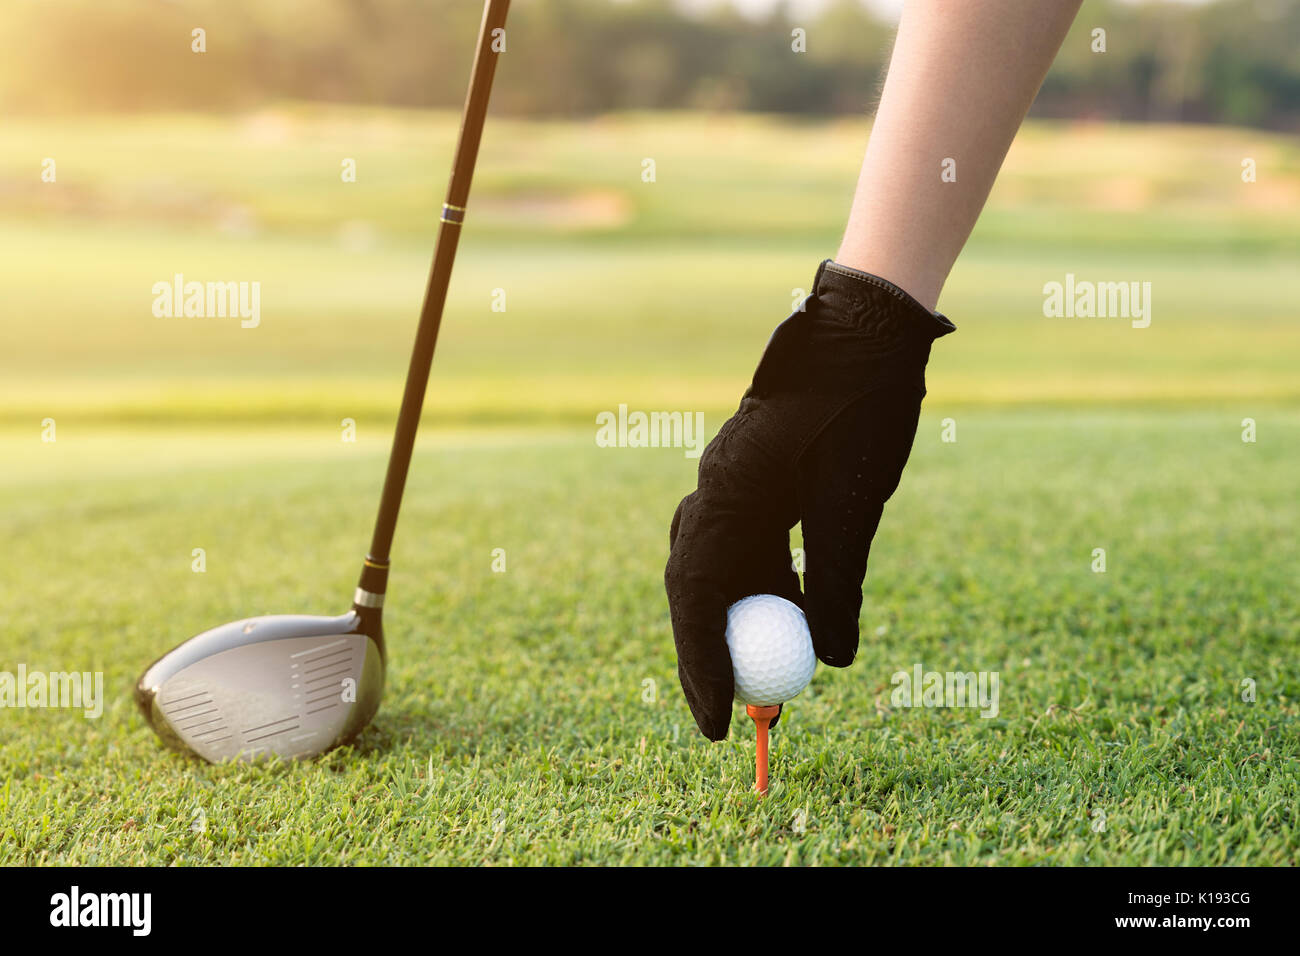 Hand placing a tee with golf ball. Hand hold golf ball with tee on course, close-up Stock Photo